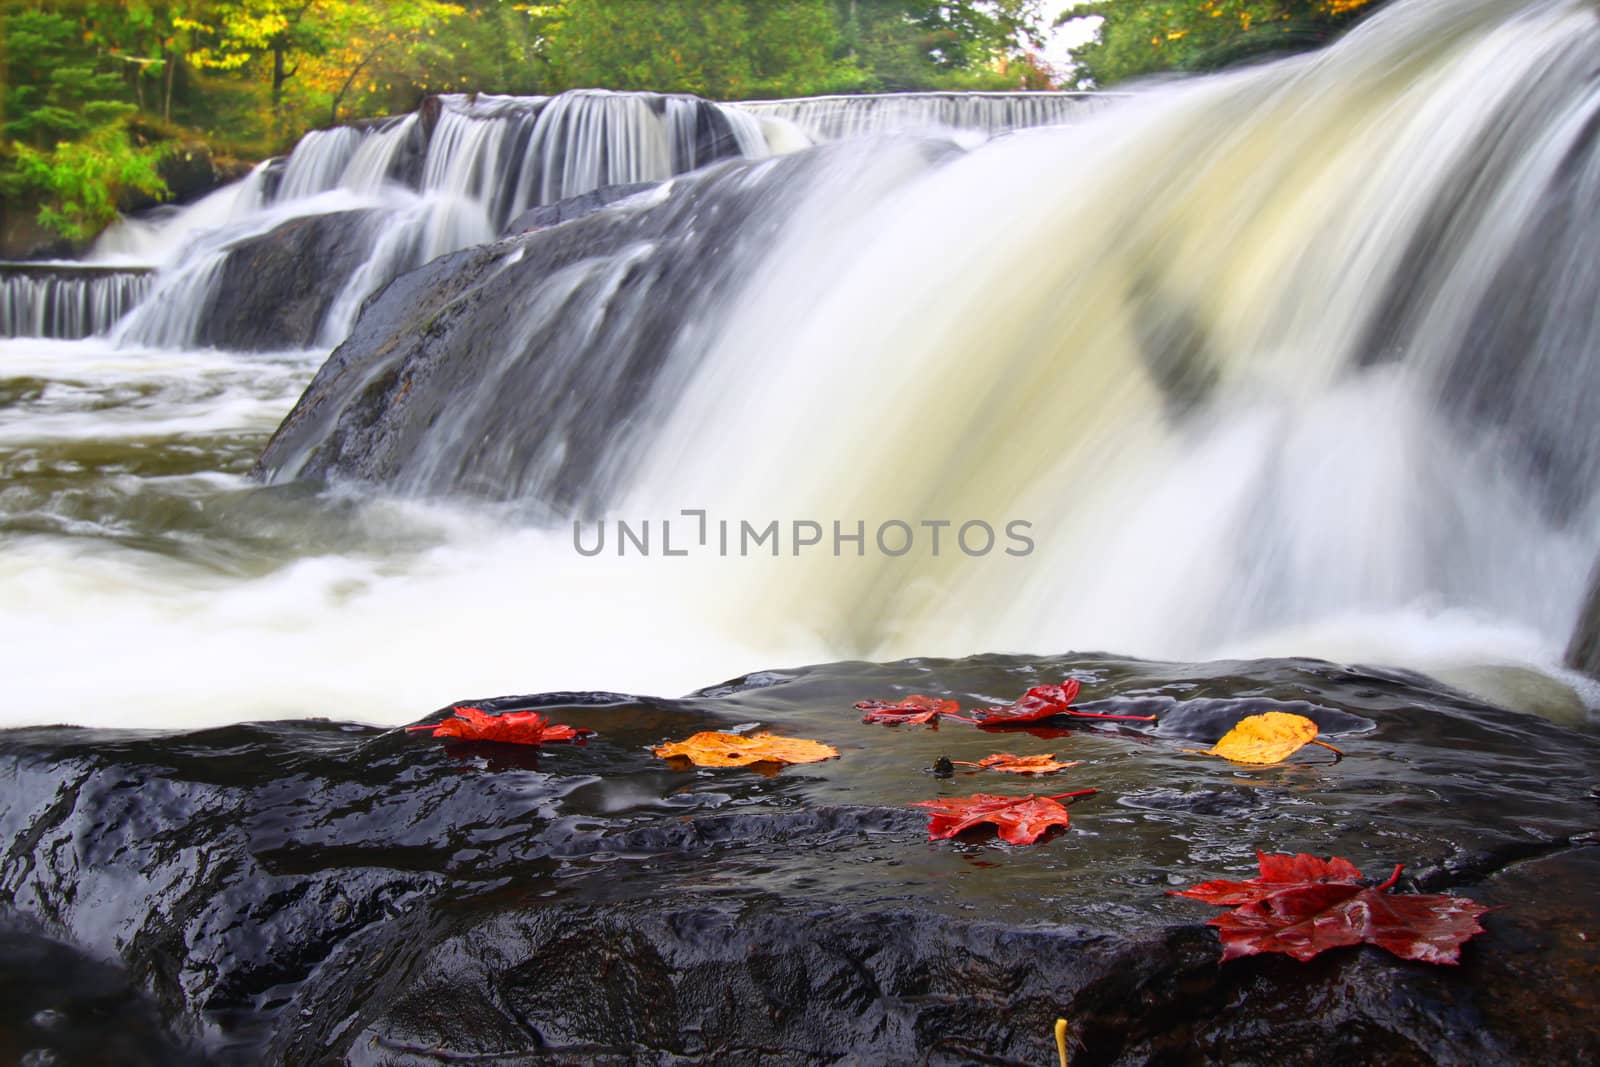 Autumn foliage surrounds the cascading waters of Bond Falls in northern Michigan.